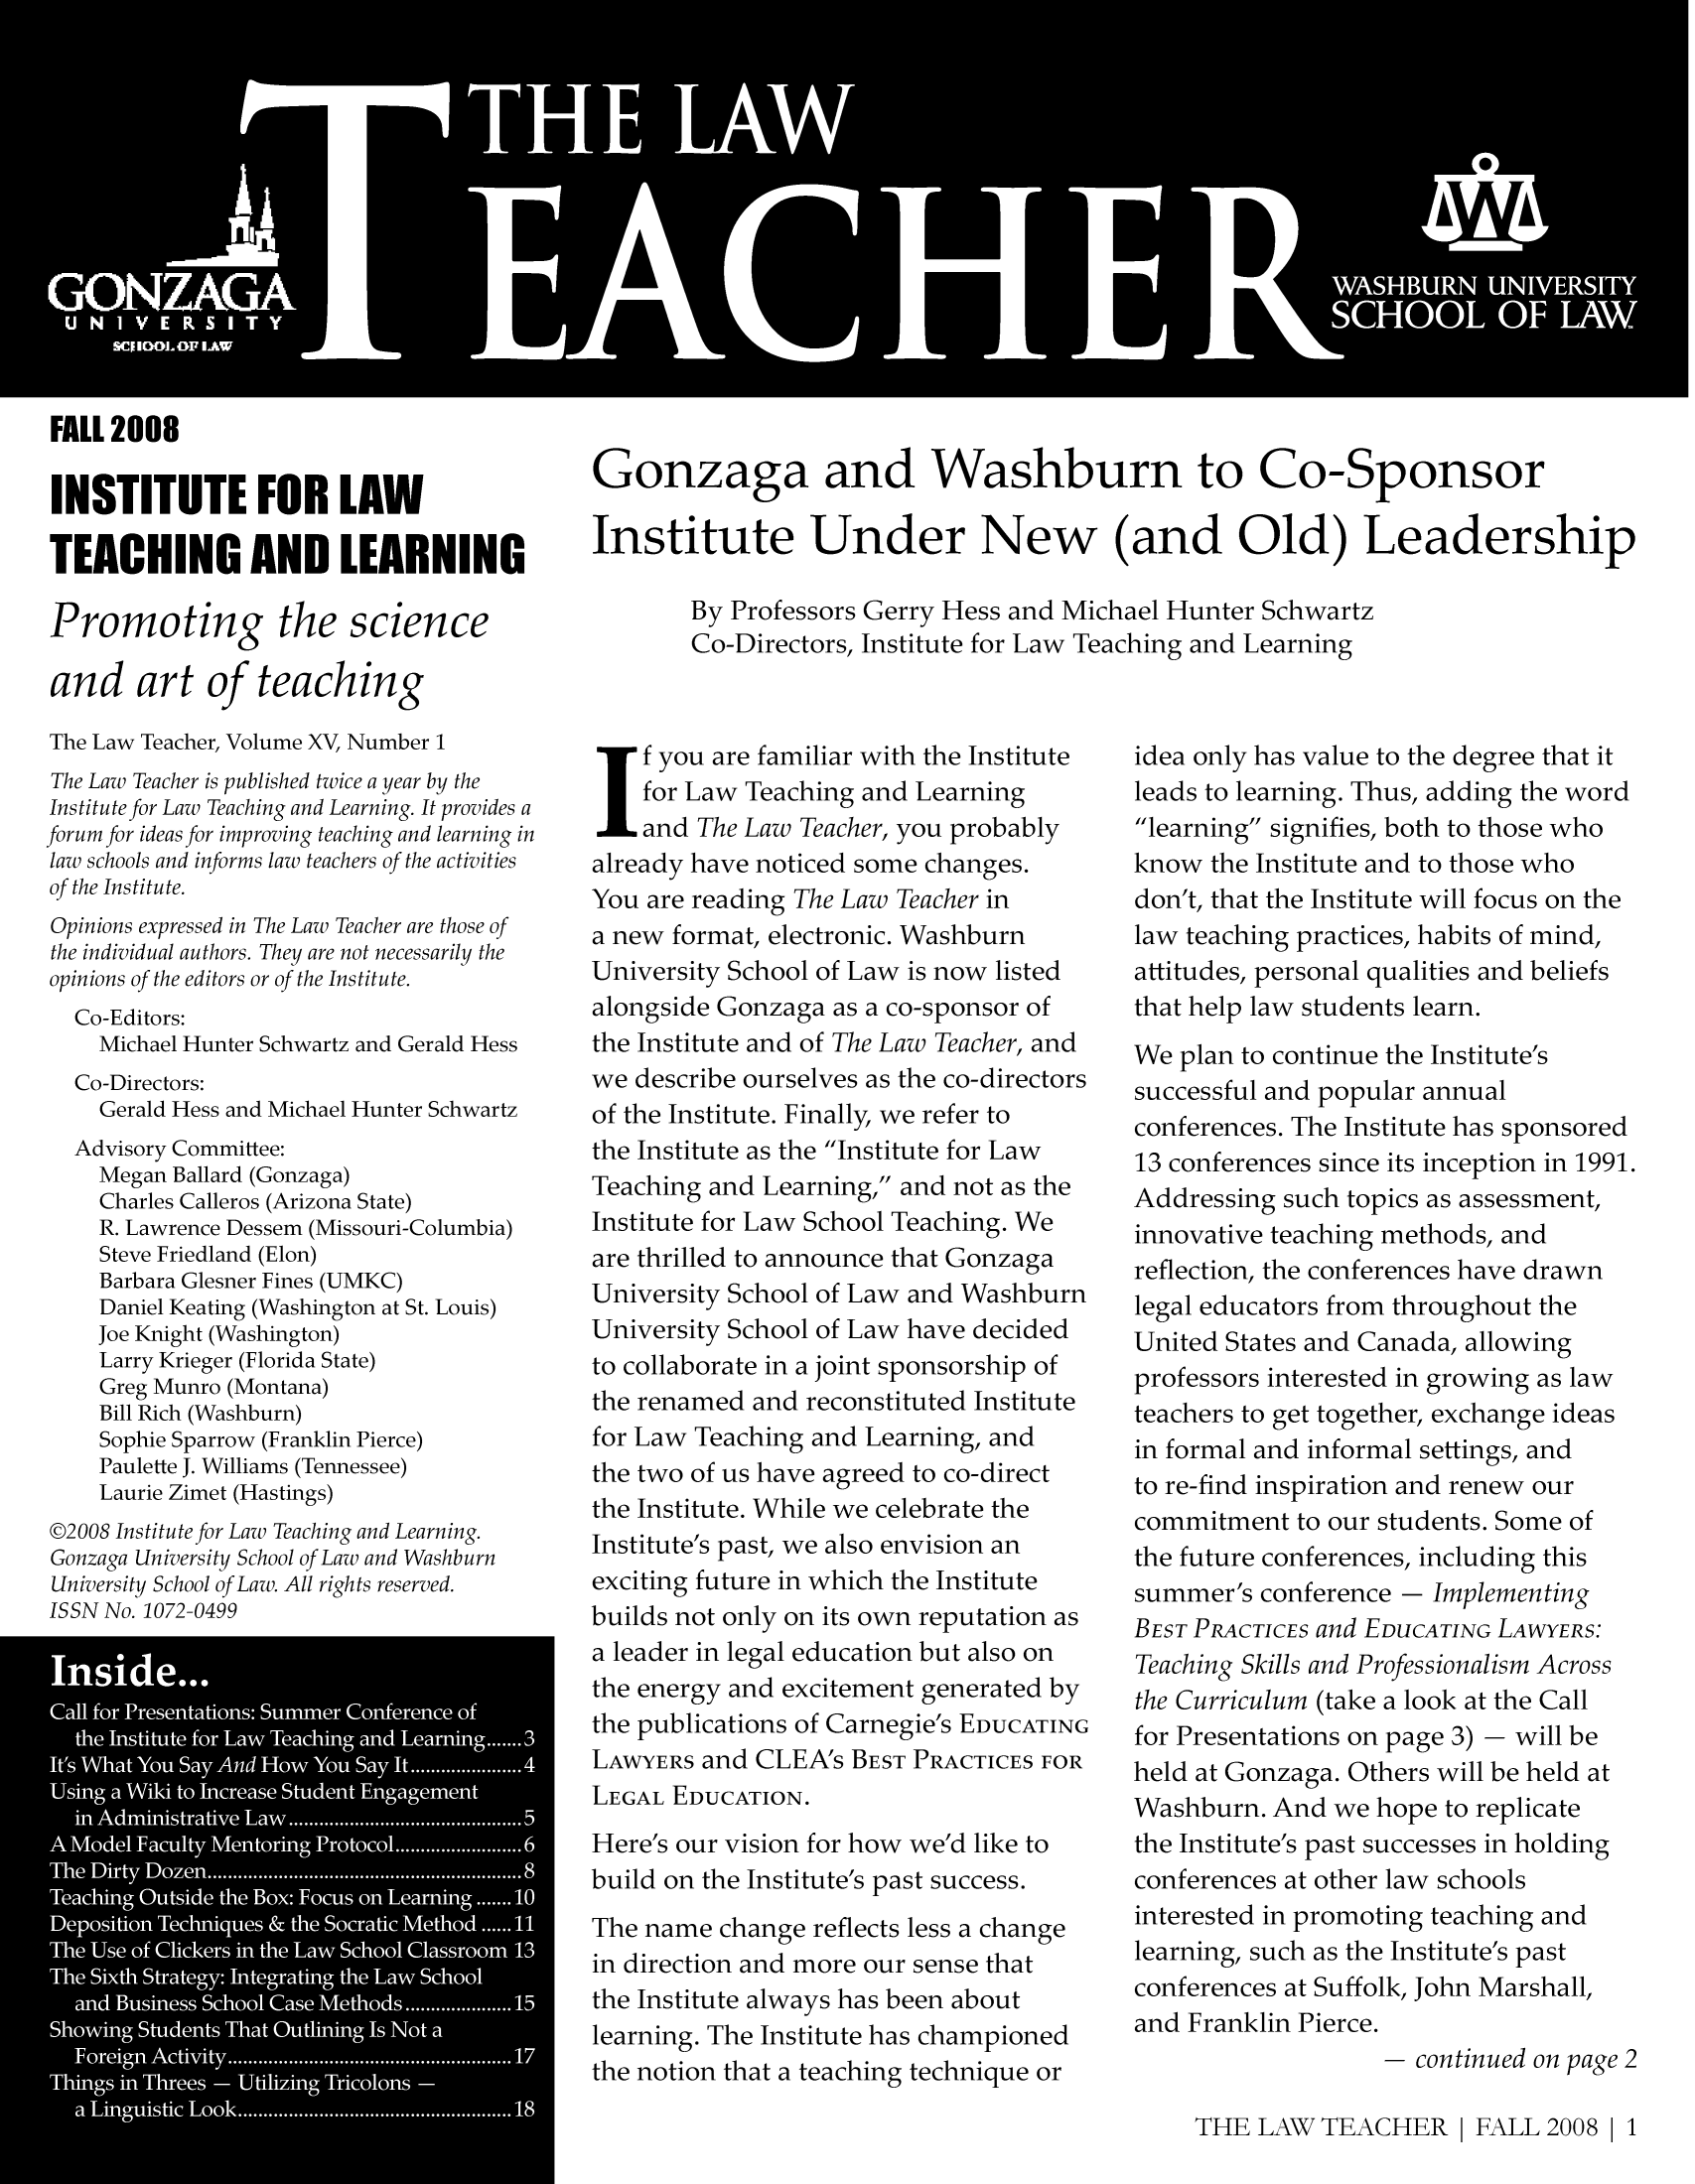 handle is hein.journals/lawteaer15 and id is 1 raw text is: FALL 2008INSTITUTE FOR LAW    Gonzaga and Washburn to Co-SponsorTEACHING ANDLEARNING Institute Under New (and Old) LeadershipPromoting the scienceand art of teachingThe Law Teacher, Volume XV, Number 1The Law Teacher is published twice a year by theInstitute for Law Teaching and Learning. It provides aforum for ideas for improving teaching and learning inlaw schools and informs law teachers of the activitiesof the Institute.Opinions expressed in The Law Teacher are those ofthe individual authors. They are not necessarily theopinions of the editors or of the Institute.Co-Editors:Michael Hunter Schwartz and Gerald HessCo-Directors:Gerald Hess and Michael Hunter SchwartzAdvisory Committee:Megan Ballard (Gonzaga)Charles Calleros (Arizona State)R. Lawrence Dessem (Missouri-Columbia)Steve Friedland (Elon)Barbara Glesner Fines (UMKC)Daniel Keating (Washington at St. Louis)Joe Knight (Washington)Larry Krieger (Florida State)Greg Munro (Montana)Bill Rich (Washburn)Sophie Sparrow (Franklin Pierce)Paulette J. Williams (Tennessee)Laurie Zimet (Hastings)@2008 Institute for Law Teaching and Learning.Gonzaga University School of Law and WashburnUniversity School of Law. All rights reserved.ISSN No. 1072-0499I   side.. .Call for Presentations: Summer Conference ofthe Institute for Law Teaching and Learning ....... 3It's What You Say And How You Say It ...................... 4Using a Wiki to Increase Student Engagementin  A dm inistrative Law   .............................................. 5A Model Faculty Mentoring Protocol ......................... 6The  D irty  D ozen  .............................................................. 8Teaching Outside the Box: Focus on Learning ....... 10Deposition Techniques & the Socratic Method ...... 11The Use of Clickers in the Law School Classroom 13The Sixth Strategy: Integrating the Law Schooland Business School Case Methods ..................... 15Showing Students That Outlining Is Not aForeign  A ctivity  ........................................................ 17Thng inThee   - Utliin Tios-a i gu s i  Lo k ..............................1By Professors Gerry Hess and Michael Hunter SchwartzCo-Directors, Institute for Law Teaching and LearningIf you are familiar with the Institutefor Law Teaching and Learningand The Law Teacher, you probablyalready have noticed some changes.You are reading The Law Teacher ina new format, electronic. WashburnUniversity School of Law is now listedalongside Gonzaga as a co-sponsor ofthe Institute and of The Law Teacher, andwe describe ourselves as the co-directorsof the Institute. Finally, we refer tothe Institute as the Institute for LawTeaching and Learning, and not as theInstitute for Law School Teaching. Weare thrilled to announce that GonzagaUniversity School of Law and WashburnUniversity School of Law have decidedto collaborate in a joint sponsorship ofthe renamed and reconstituted Institutefor Law Teaching and Learning, andthe two of us have agreed to co-directthe Institute. While we celebrate theInstitute's past, we also envision anexciting future in which the Institutebuilds not only on its own reputation asa leader in legal education but also onthe energy and excitement generated bythe publications of Carnegie's EDUCATINGLAWYERS and CLEA's BEST PRACTICES FORLEGAL EDUCATION.Here's our vision for how we'd like tobuild on the Institute's past success.The name change reflects less a changein direction and more our sense thatthe Institute always has been aboutlearning. The Institute has championedthe notion that a teaching technique oridea only has value to the degree that itleads to learning. Thus, adding the wordlearning signifies, both to those whoknow the Institute and to those whodon't, that the Institute will focus on thelaw teaching practices, habits of mind,attitudes, personal qualities and beliefsthat help law students learn.We plan to continue the Institute'ssuccessful and popular annualconferences. The Institute has sponsored13 conferences since its inception in 1991.Addressing such topics as assessment,innovative teaching methods, andreflection, the conferences have drawnlegal educators from throughout theUnited States and Canada, allowingprofessors interested in growing as lawteachers to get together, exchange ideasin formal and informal settings, andto re-find inspiration and renew ourcommitment to our students. Some ofthe future conferences, including thissummer's conference - ImplementingBEST PRACTICES and EDUCATING LAWYERS:Teaching Skills and Professionalism Acrossthe Curriculum (take a look at the Callfor Presentations on page 3) - will beheld at Gonzaga. Others will be held atWashburn. And we hope to replicatethe Institute's past successes in holdingconferences at other law schoolsinterested in promoting teaching andlearning, such as the Institute's pastconferences at Suffolk, John Marshall,and Franklin Pierce.- continued on page 2THE LAW TEACHER | FALL 2008|1